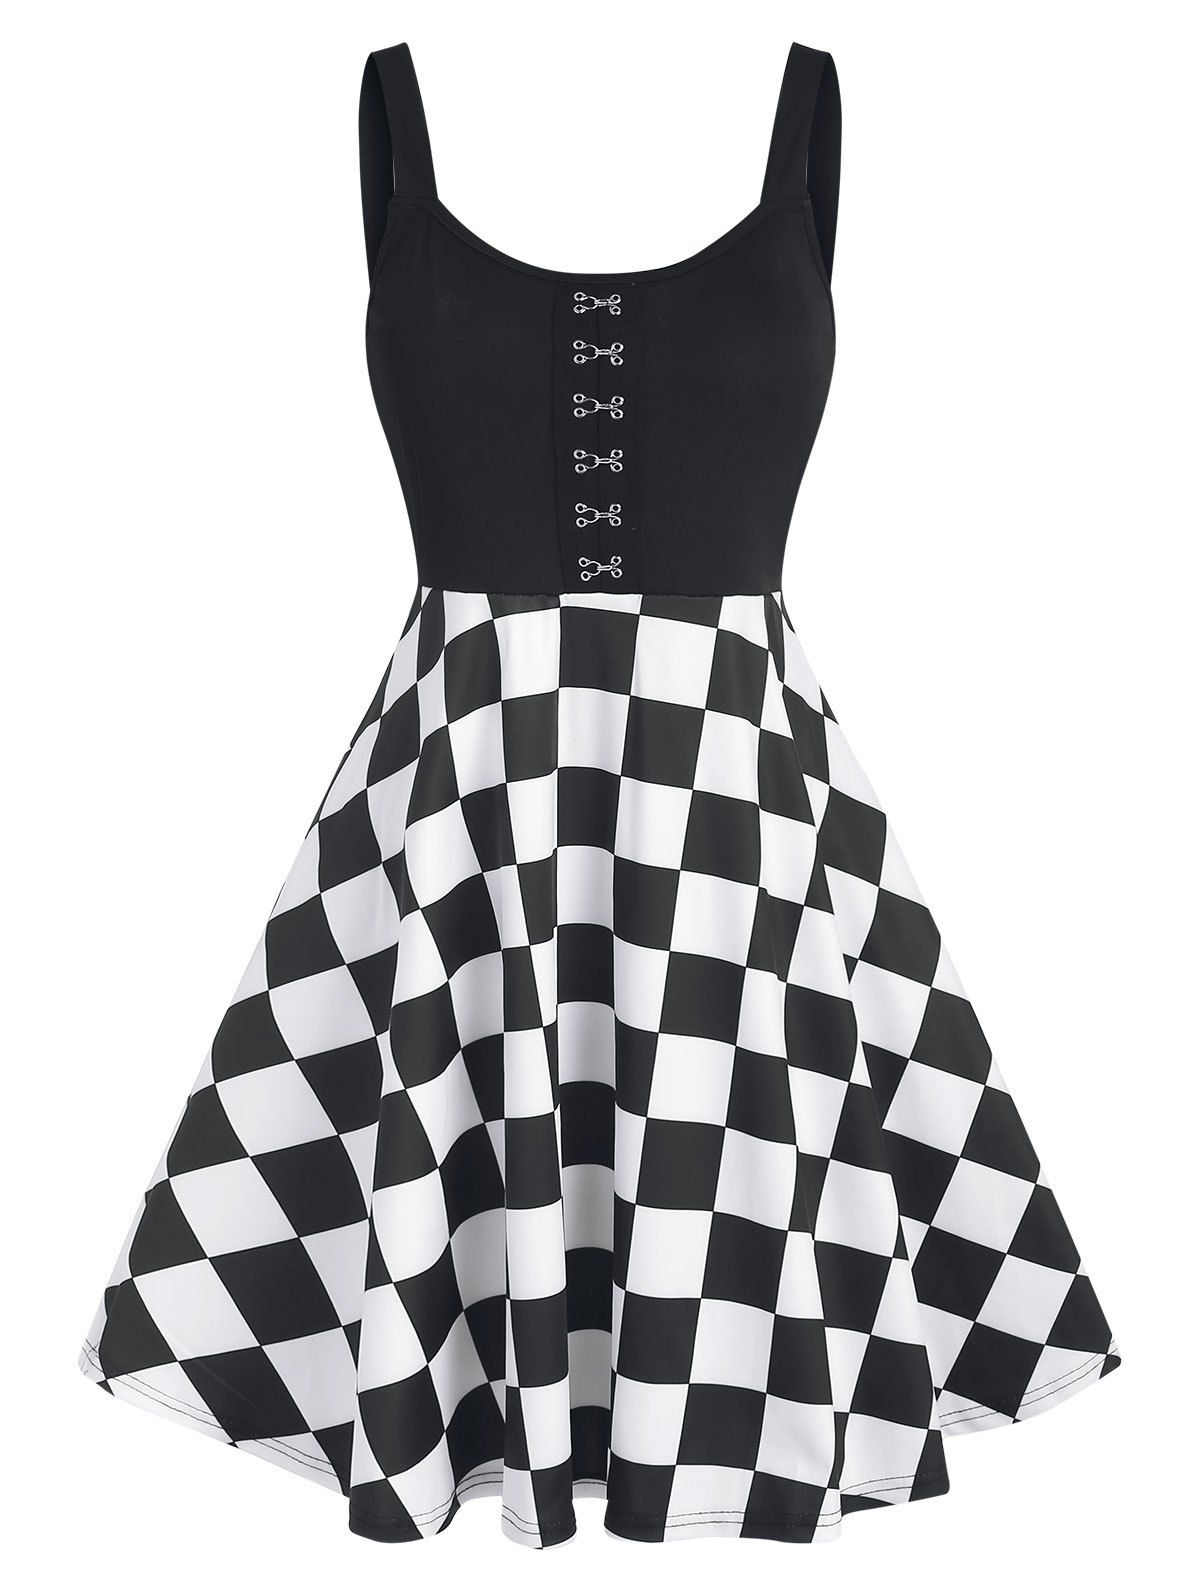 Checkerboard Plaid Hook Front A Line Flare Cami Dress - BLACK XL